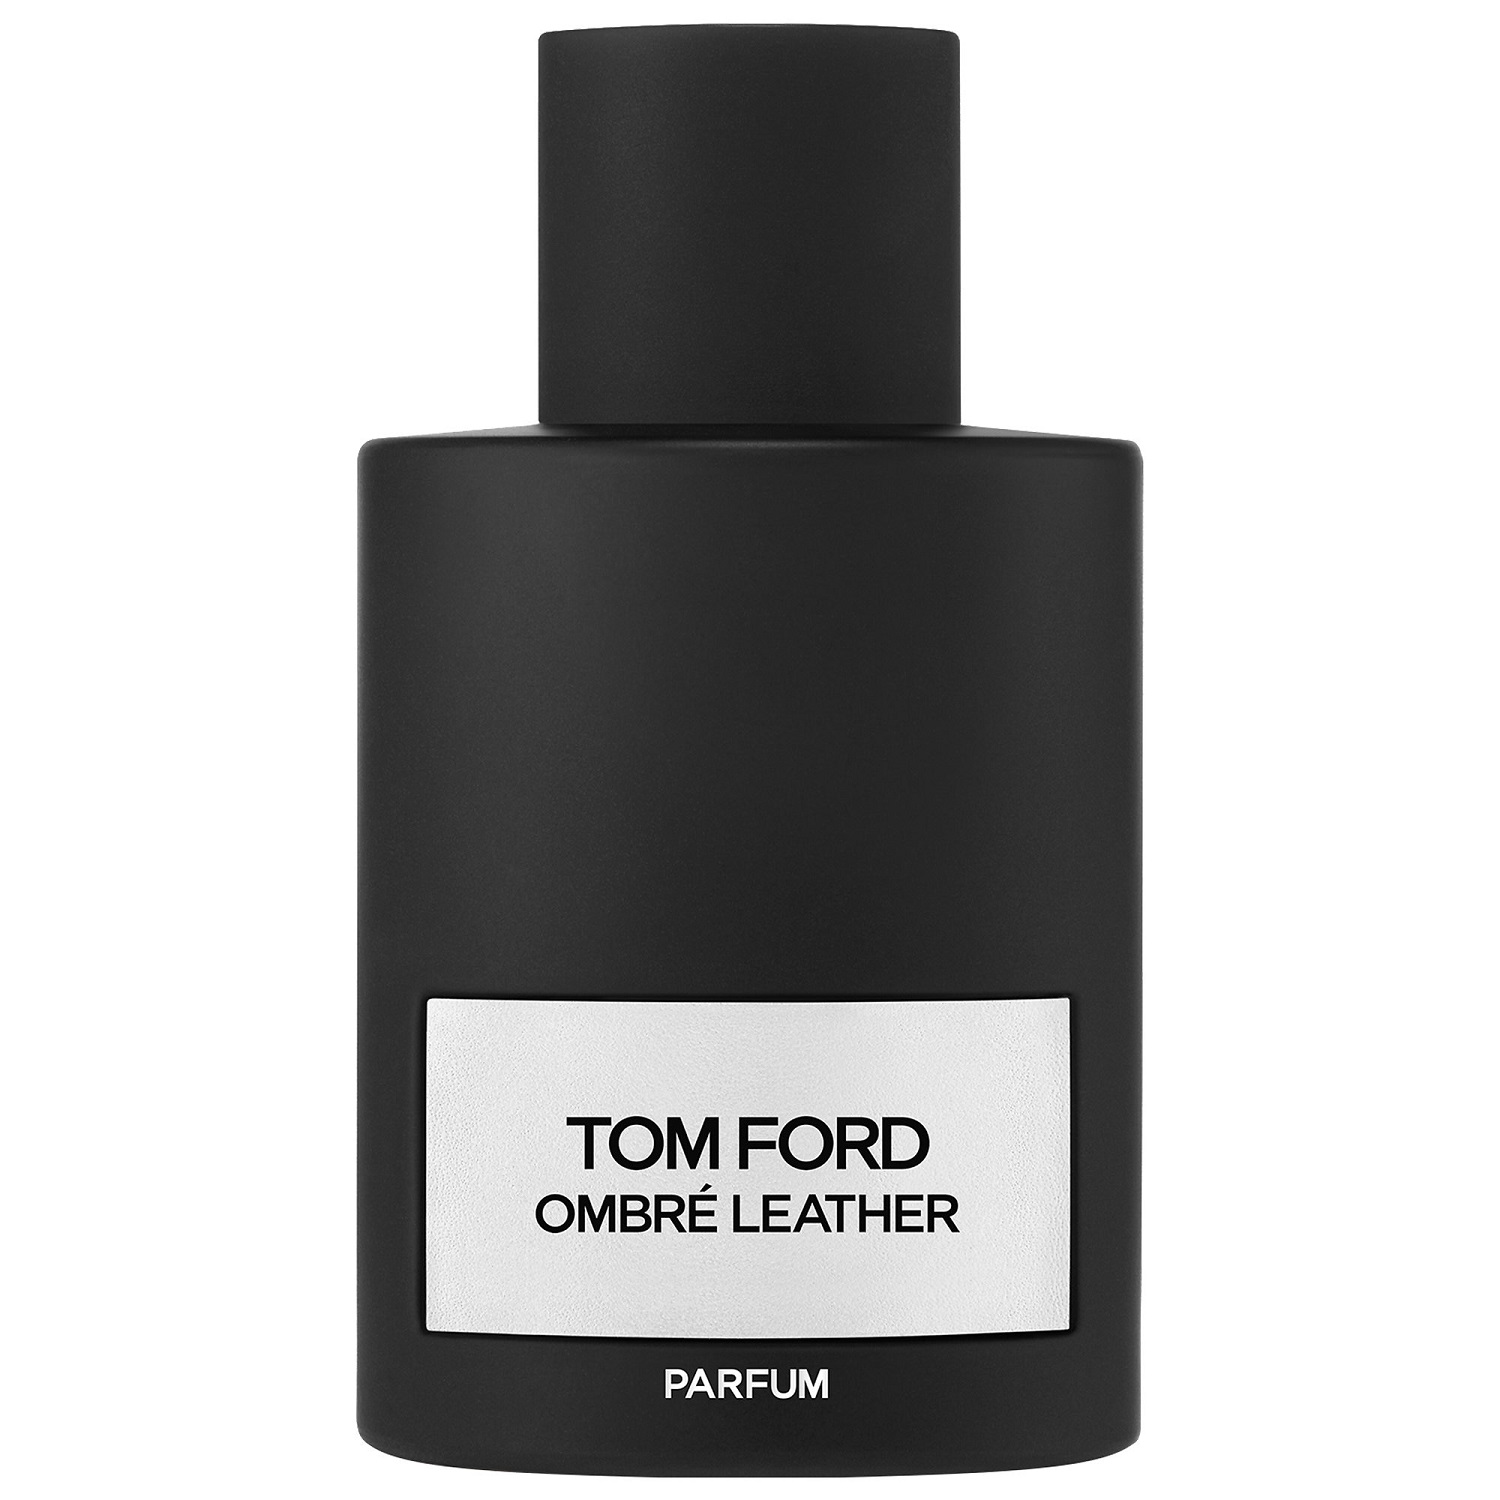 Tom Ford - Ombre Leather Parfum (1мл)